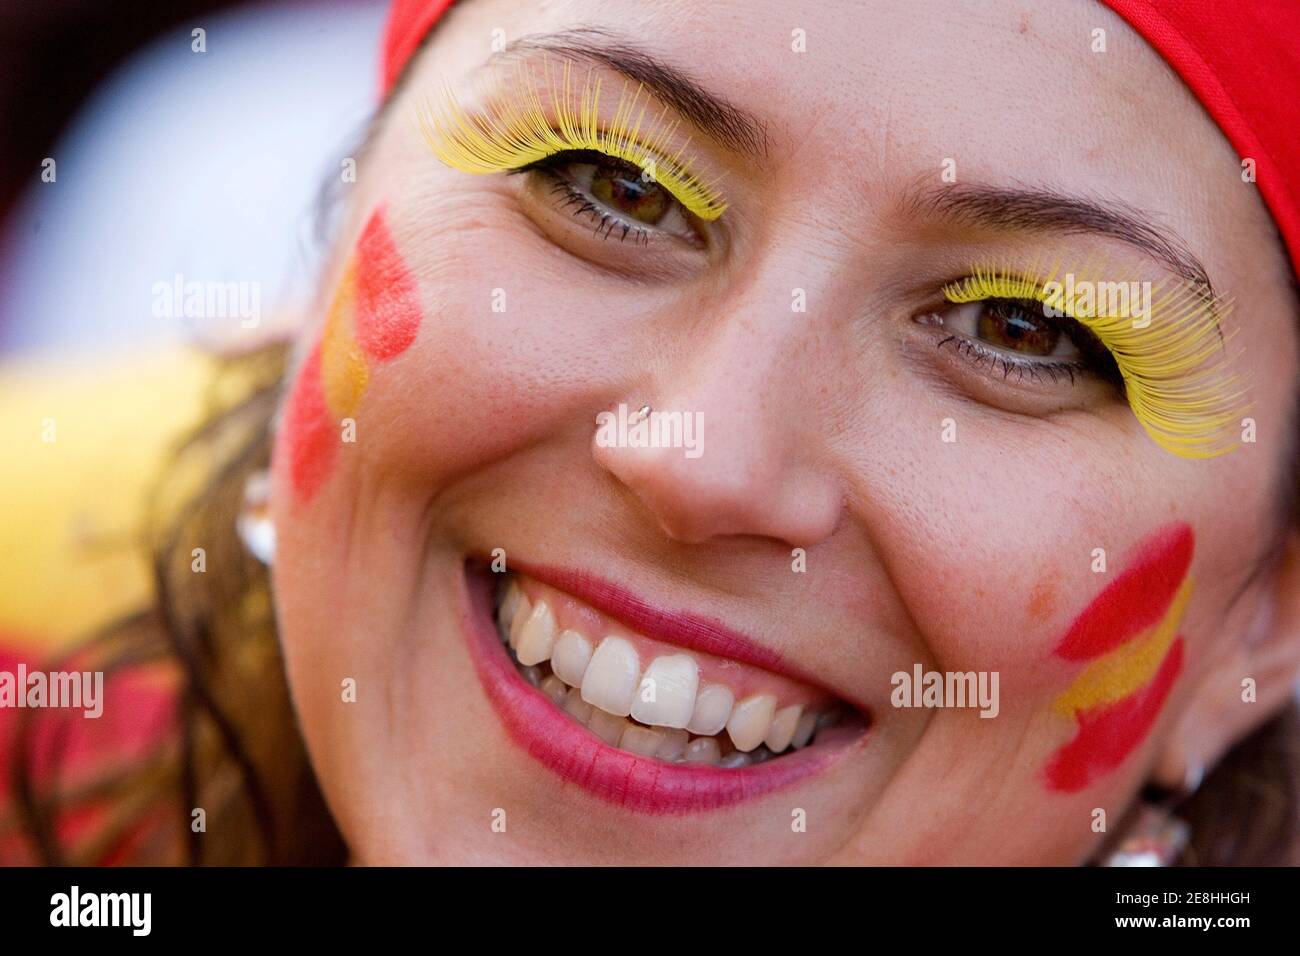 A Spain soccer fan smiles during the second round World Cup 2006 soccer match between Spain and France at a fan festival in Frankfurt June 27, 2006. REUTERS/Miro Kuzmanovic (GERMANY) Stock Photo